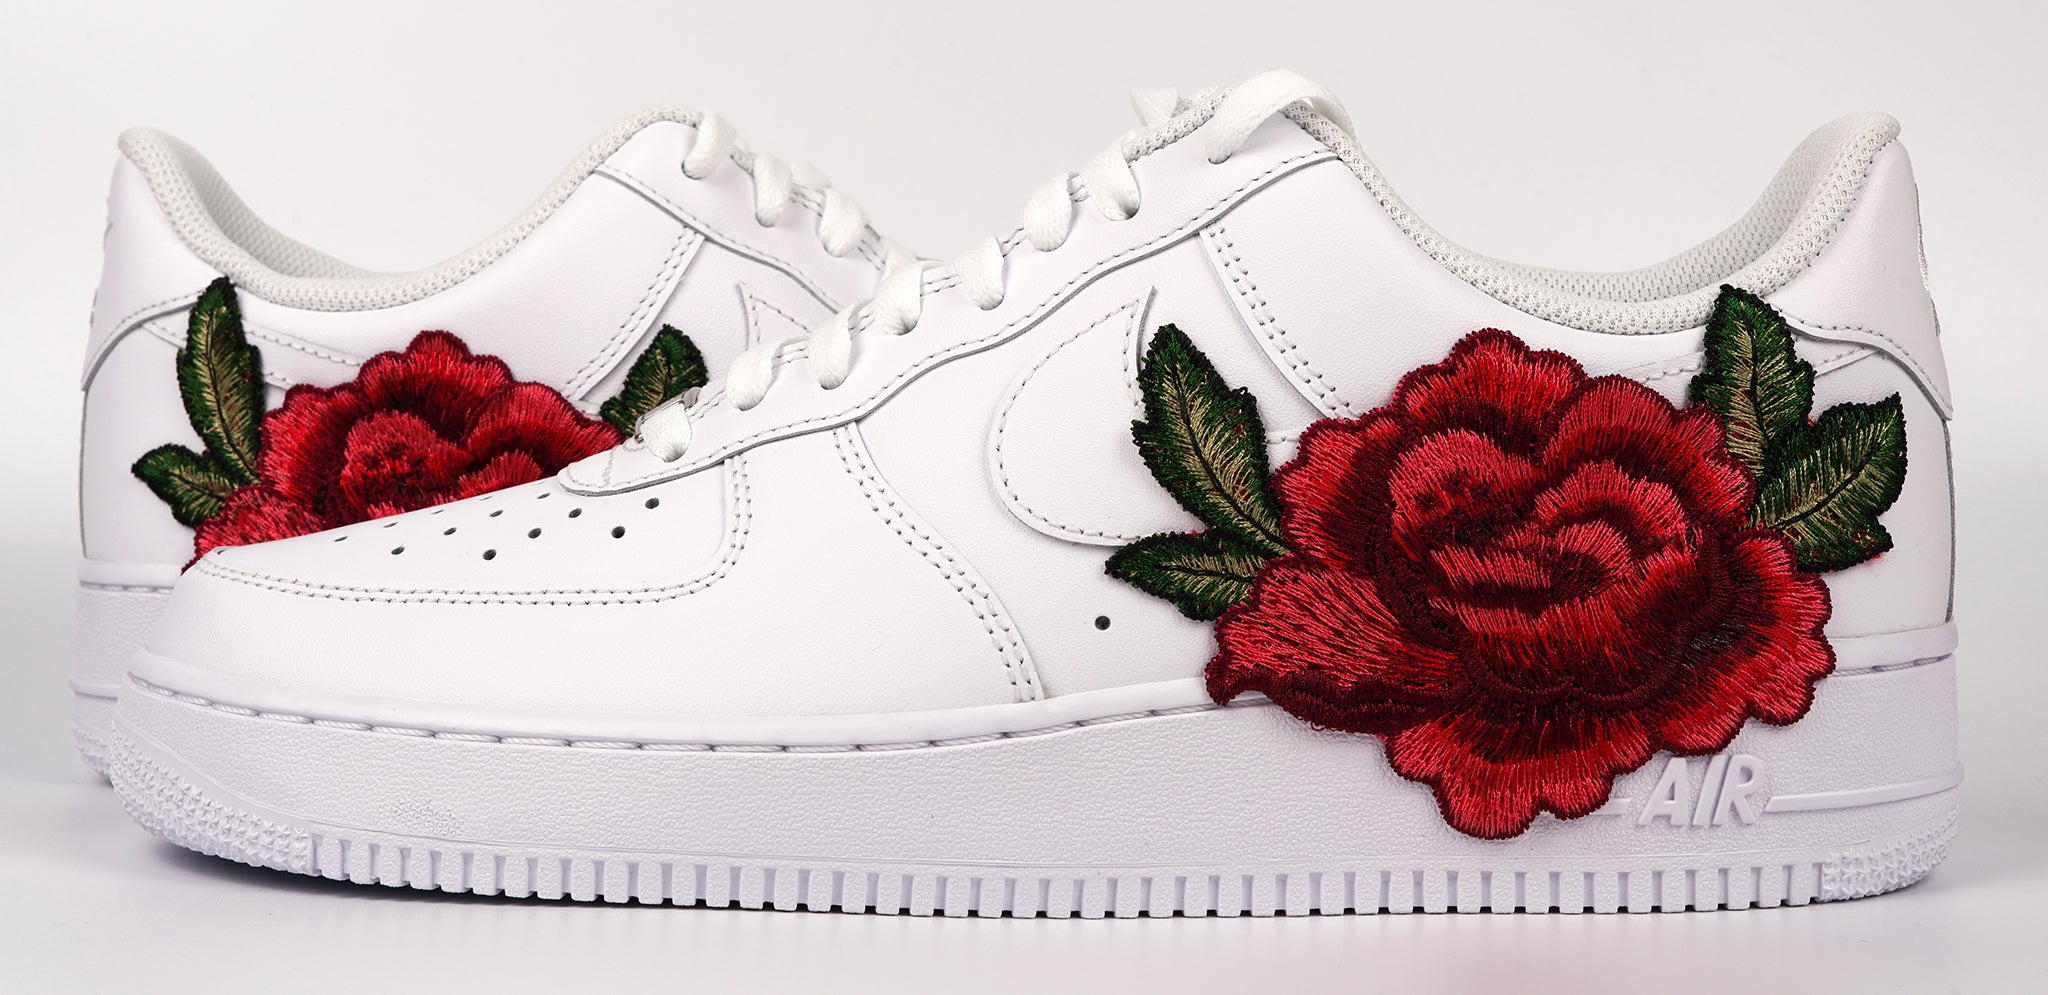 Air Force 1 Custom Low Two Tone Chicago Red White Shoes Men Women Kids –  Rose Customs, Air Force 1 Custom Shoes Sneakers Design Your Own AF1